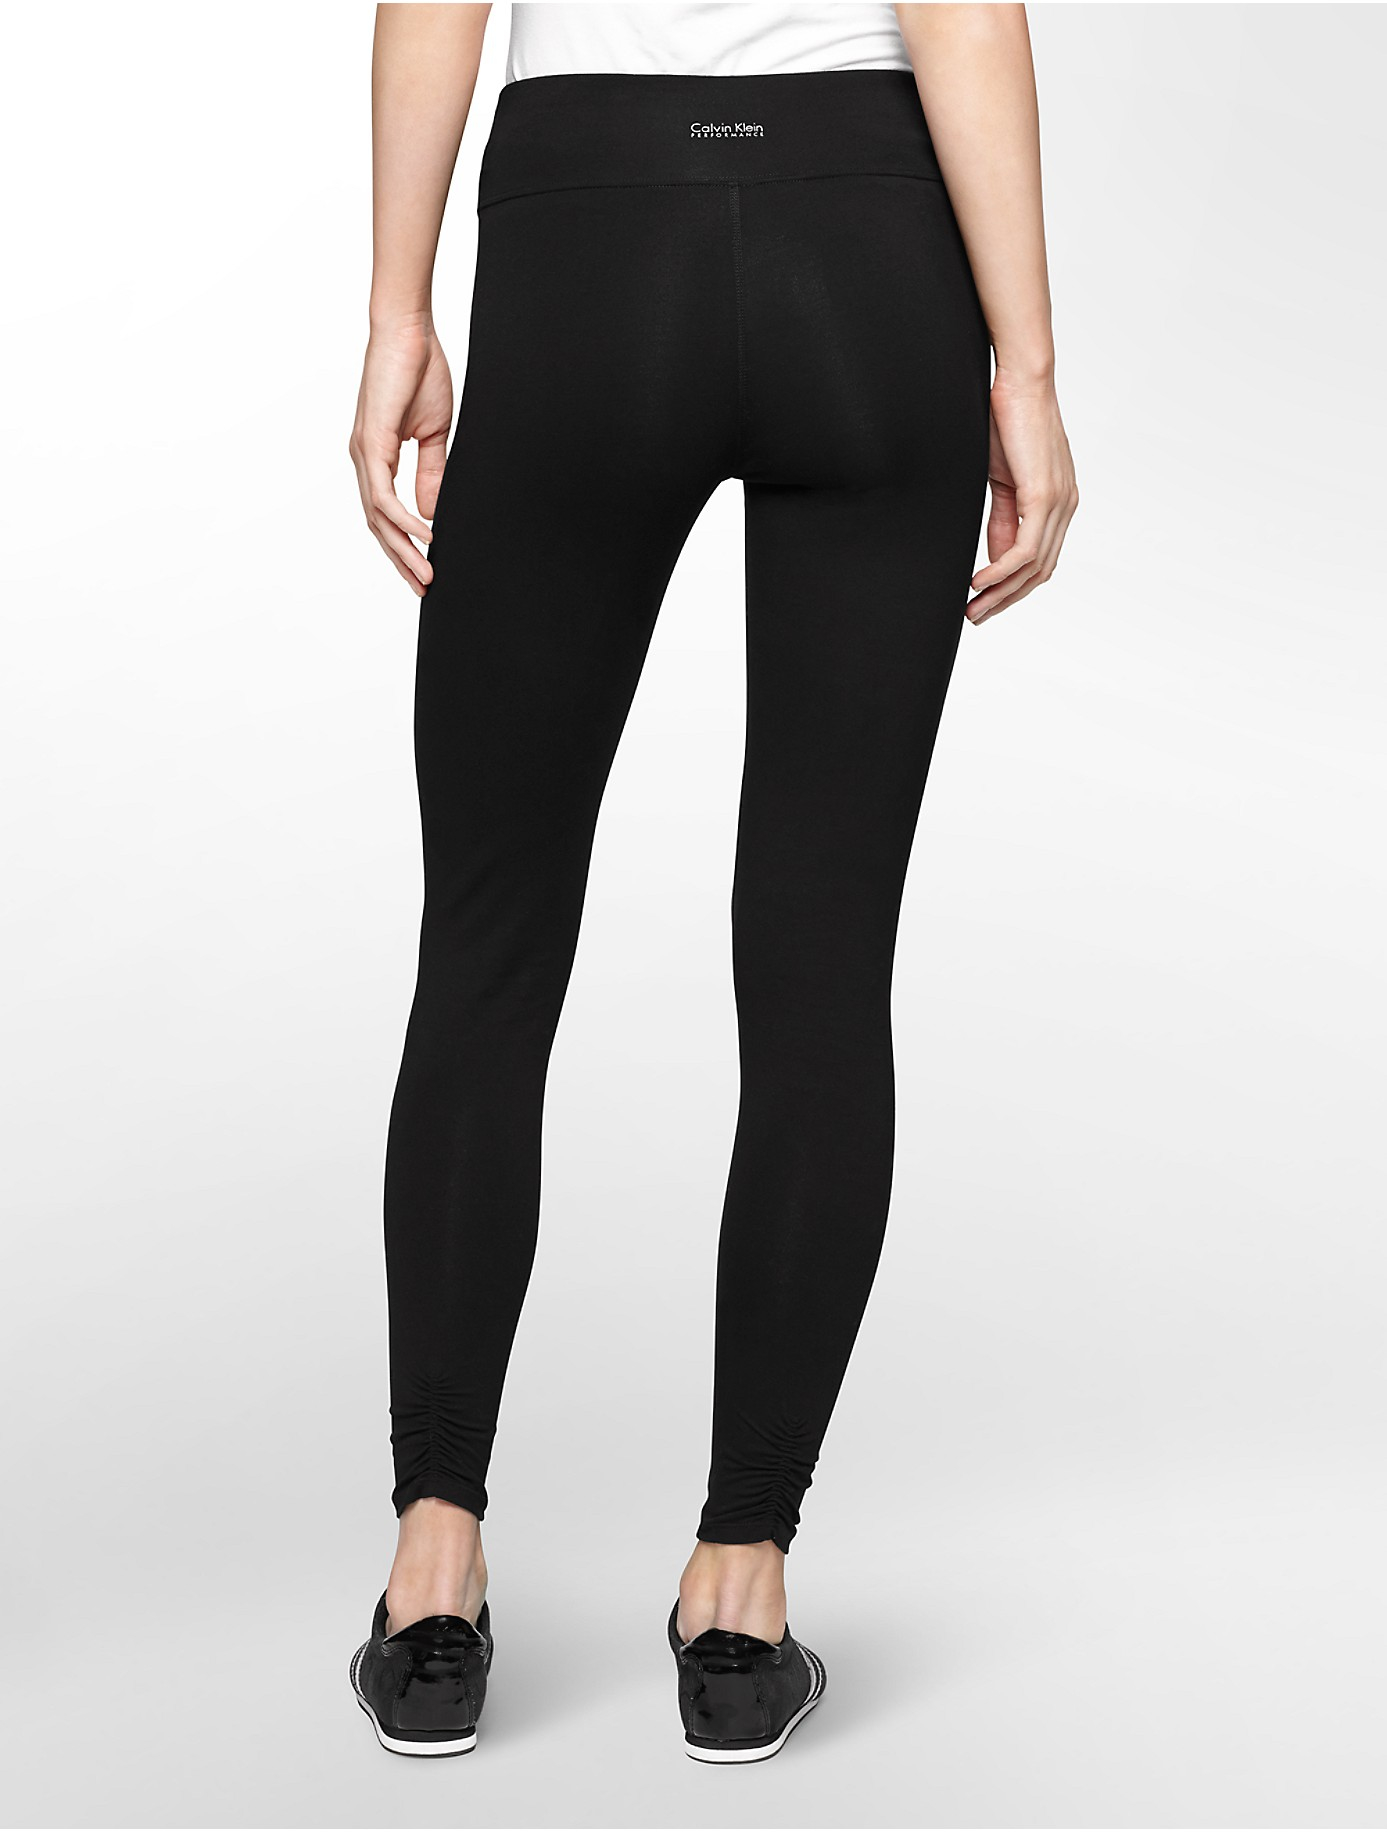 Calvin Klein White Label Performance Ruched Ankle Leggings In Black Lyst